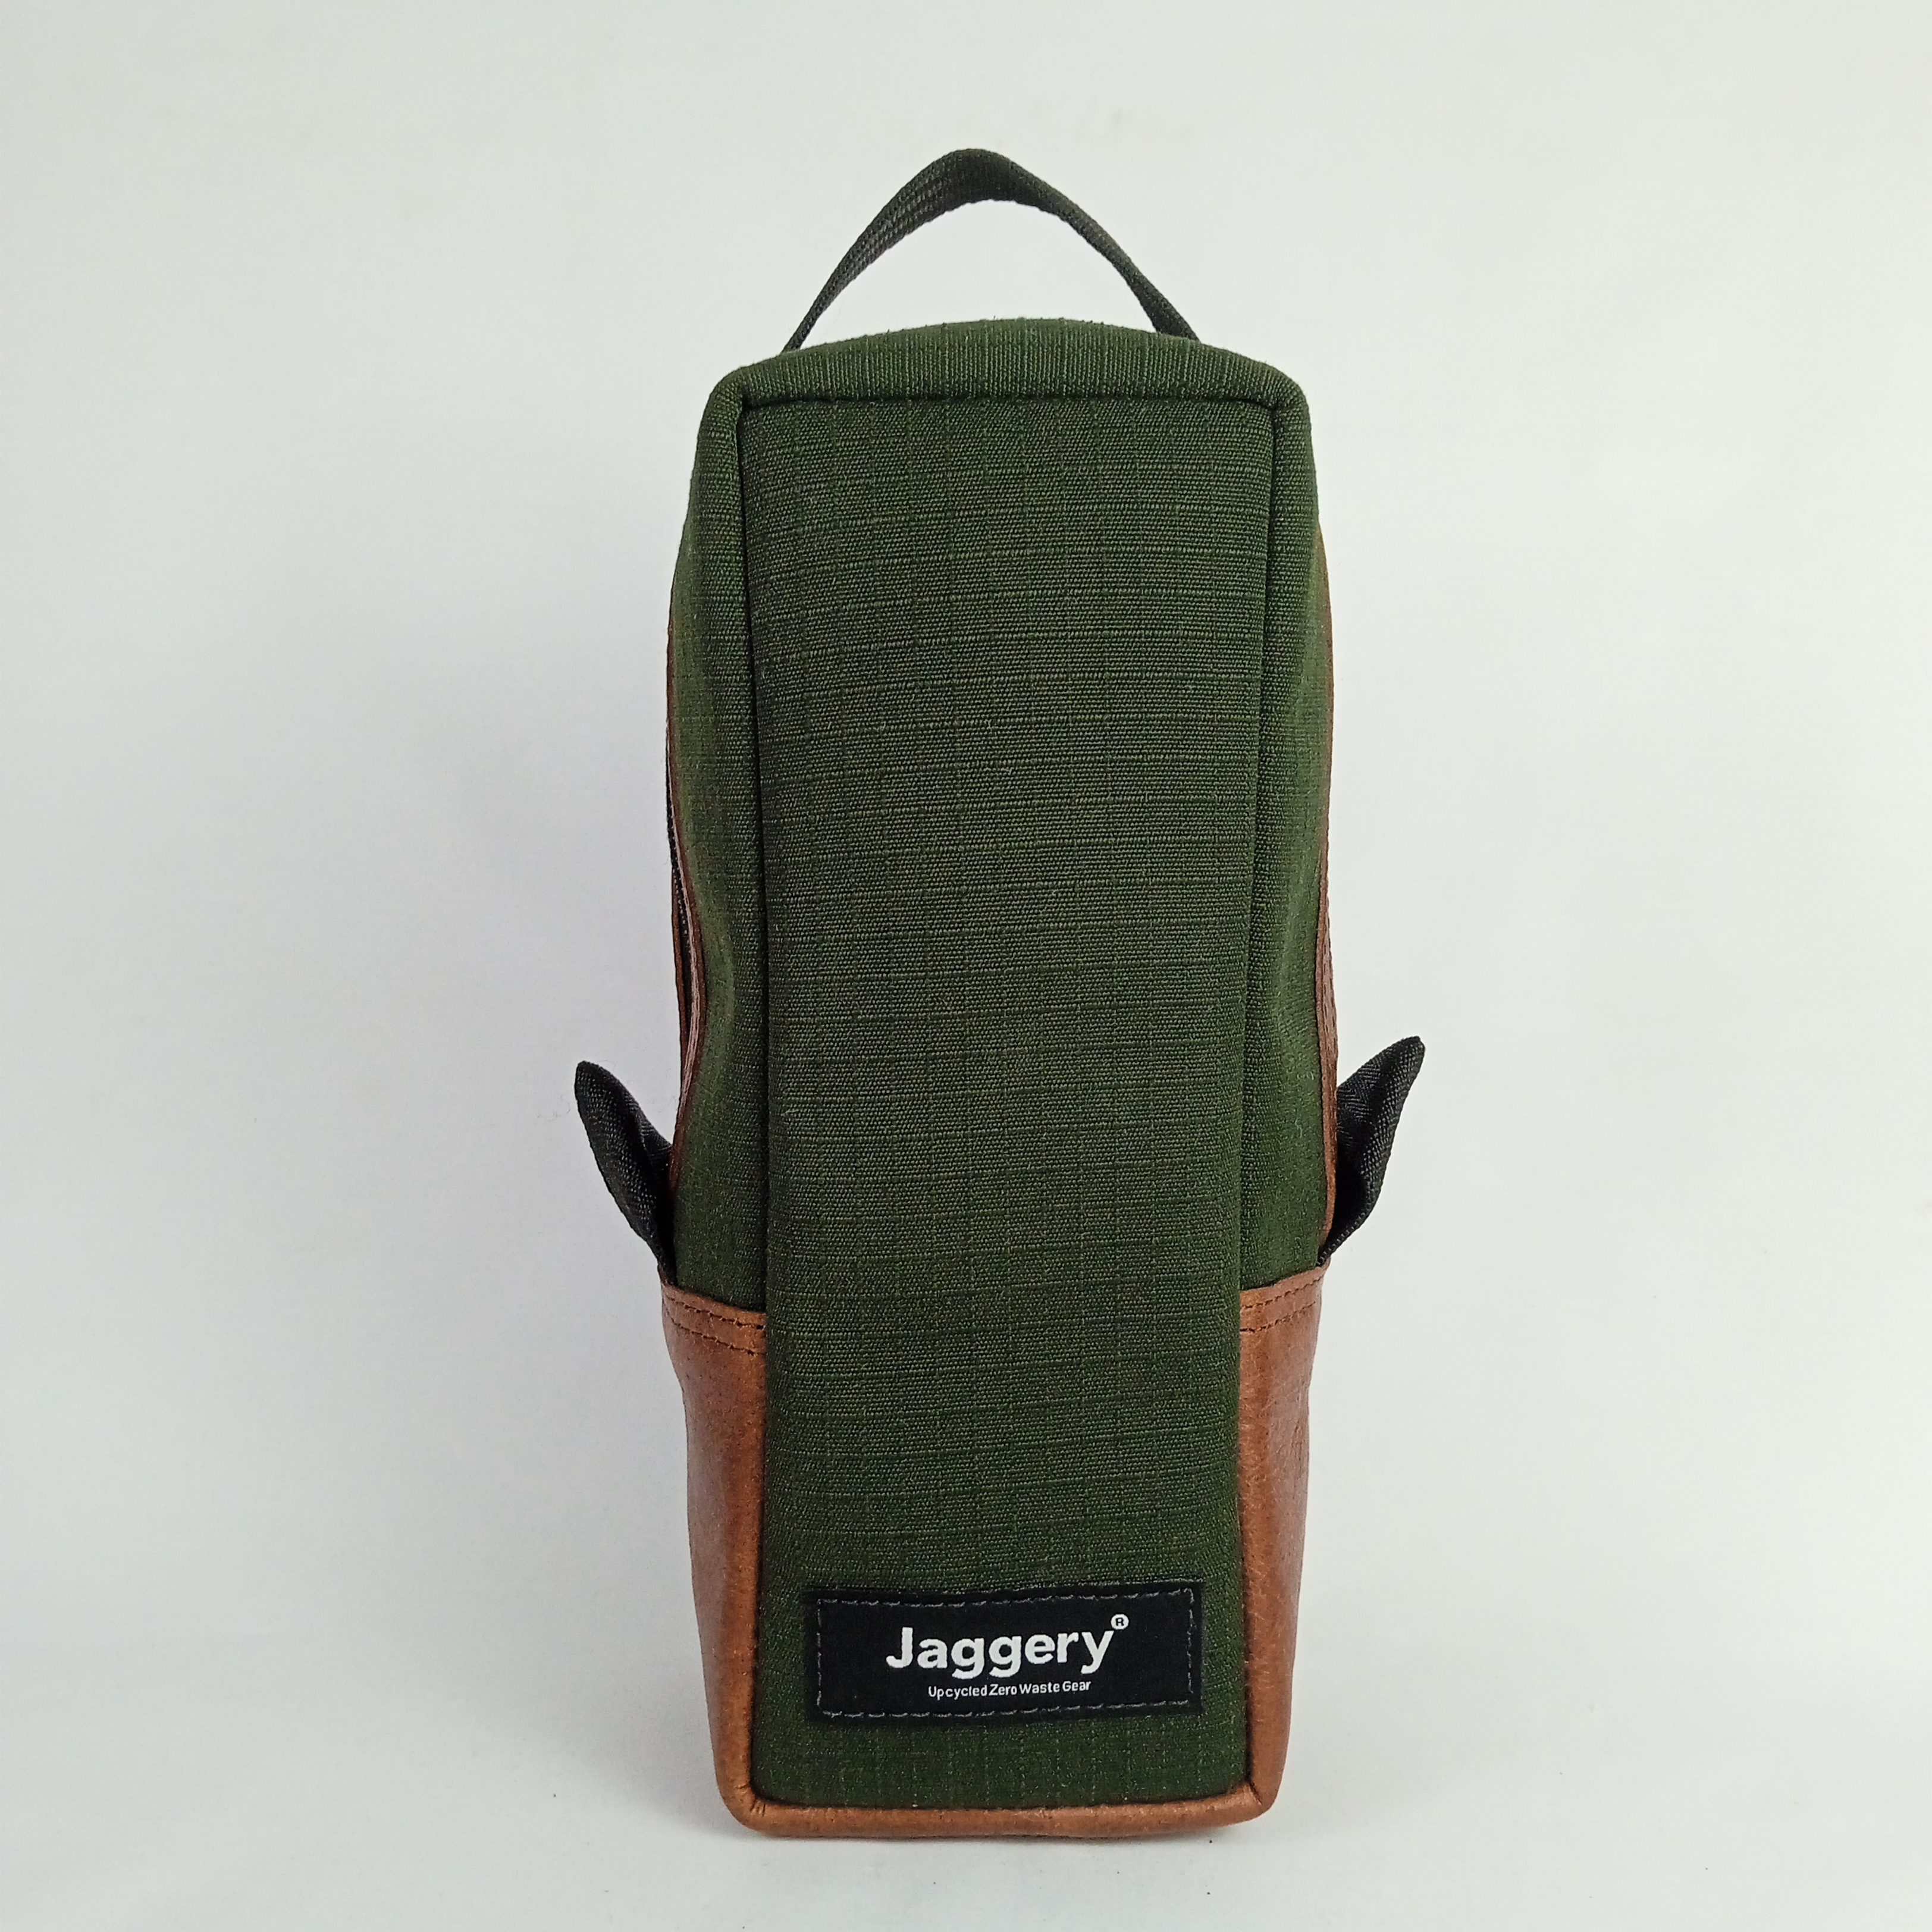 Outback and Beyond Vertical Dopp Kit in Olive Green & Brown Salvaged Nubuck